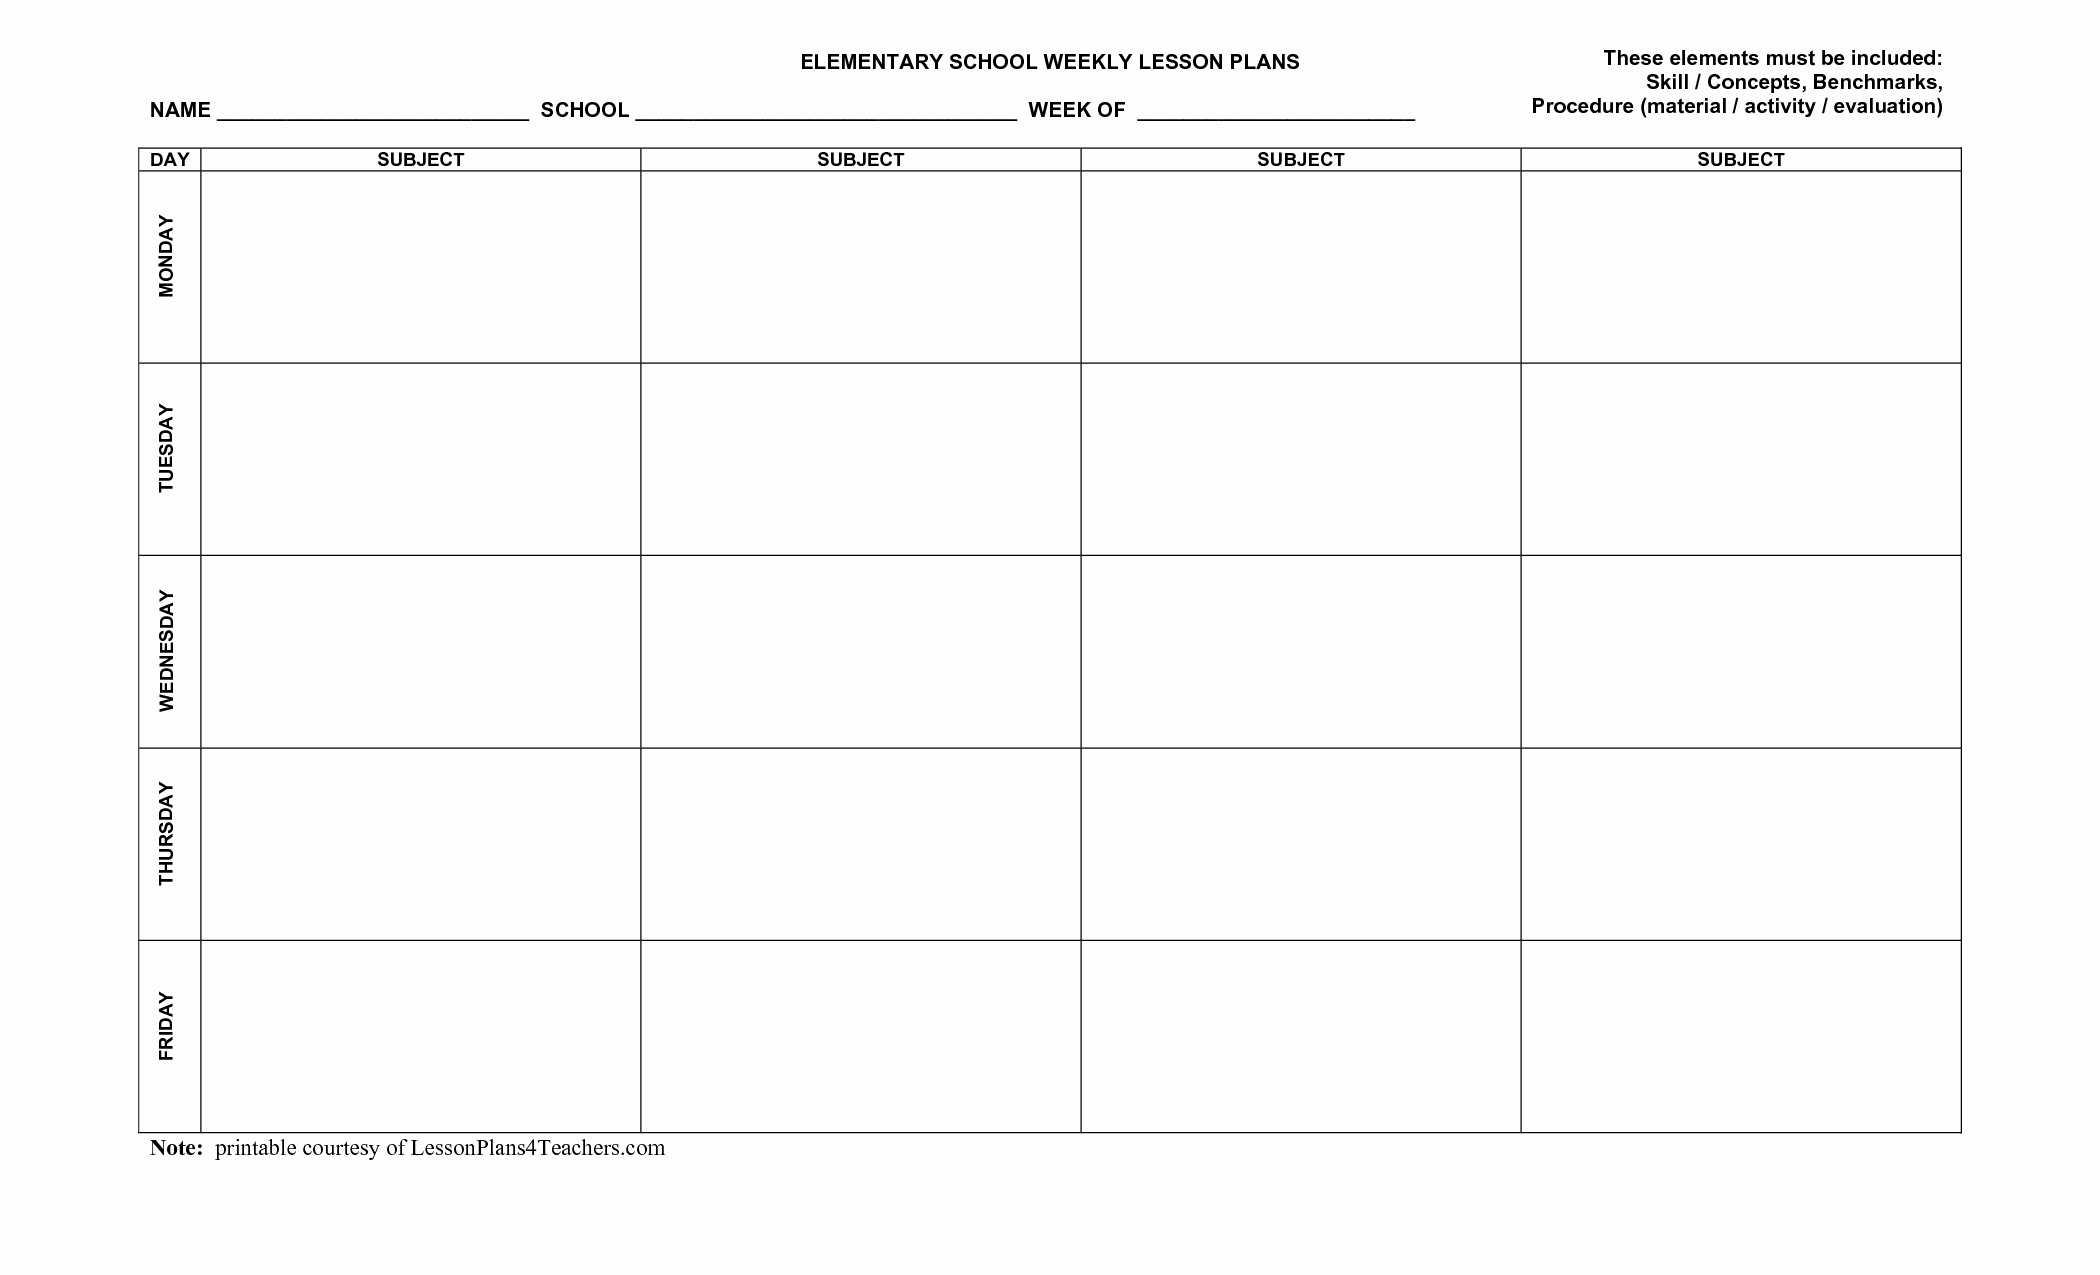 Elementary School Lesson Plan Template Awesome Blank Weekly Lesson Plan Templates Zp1trfbu